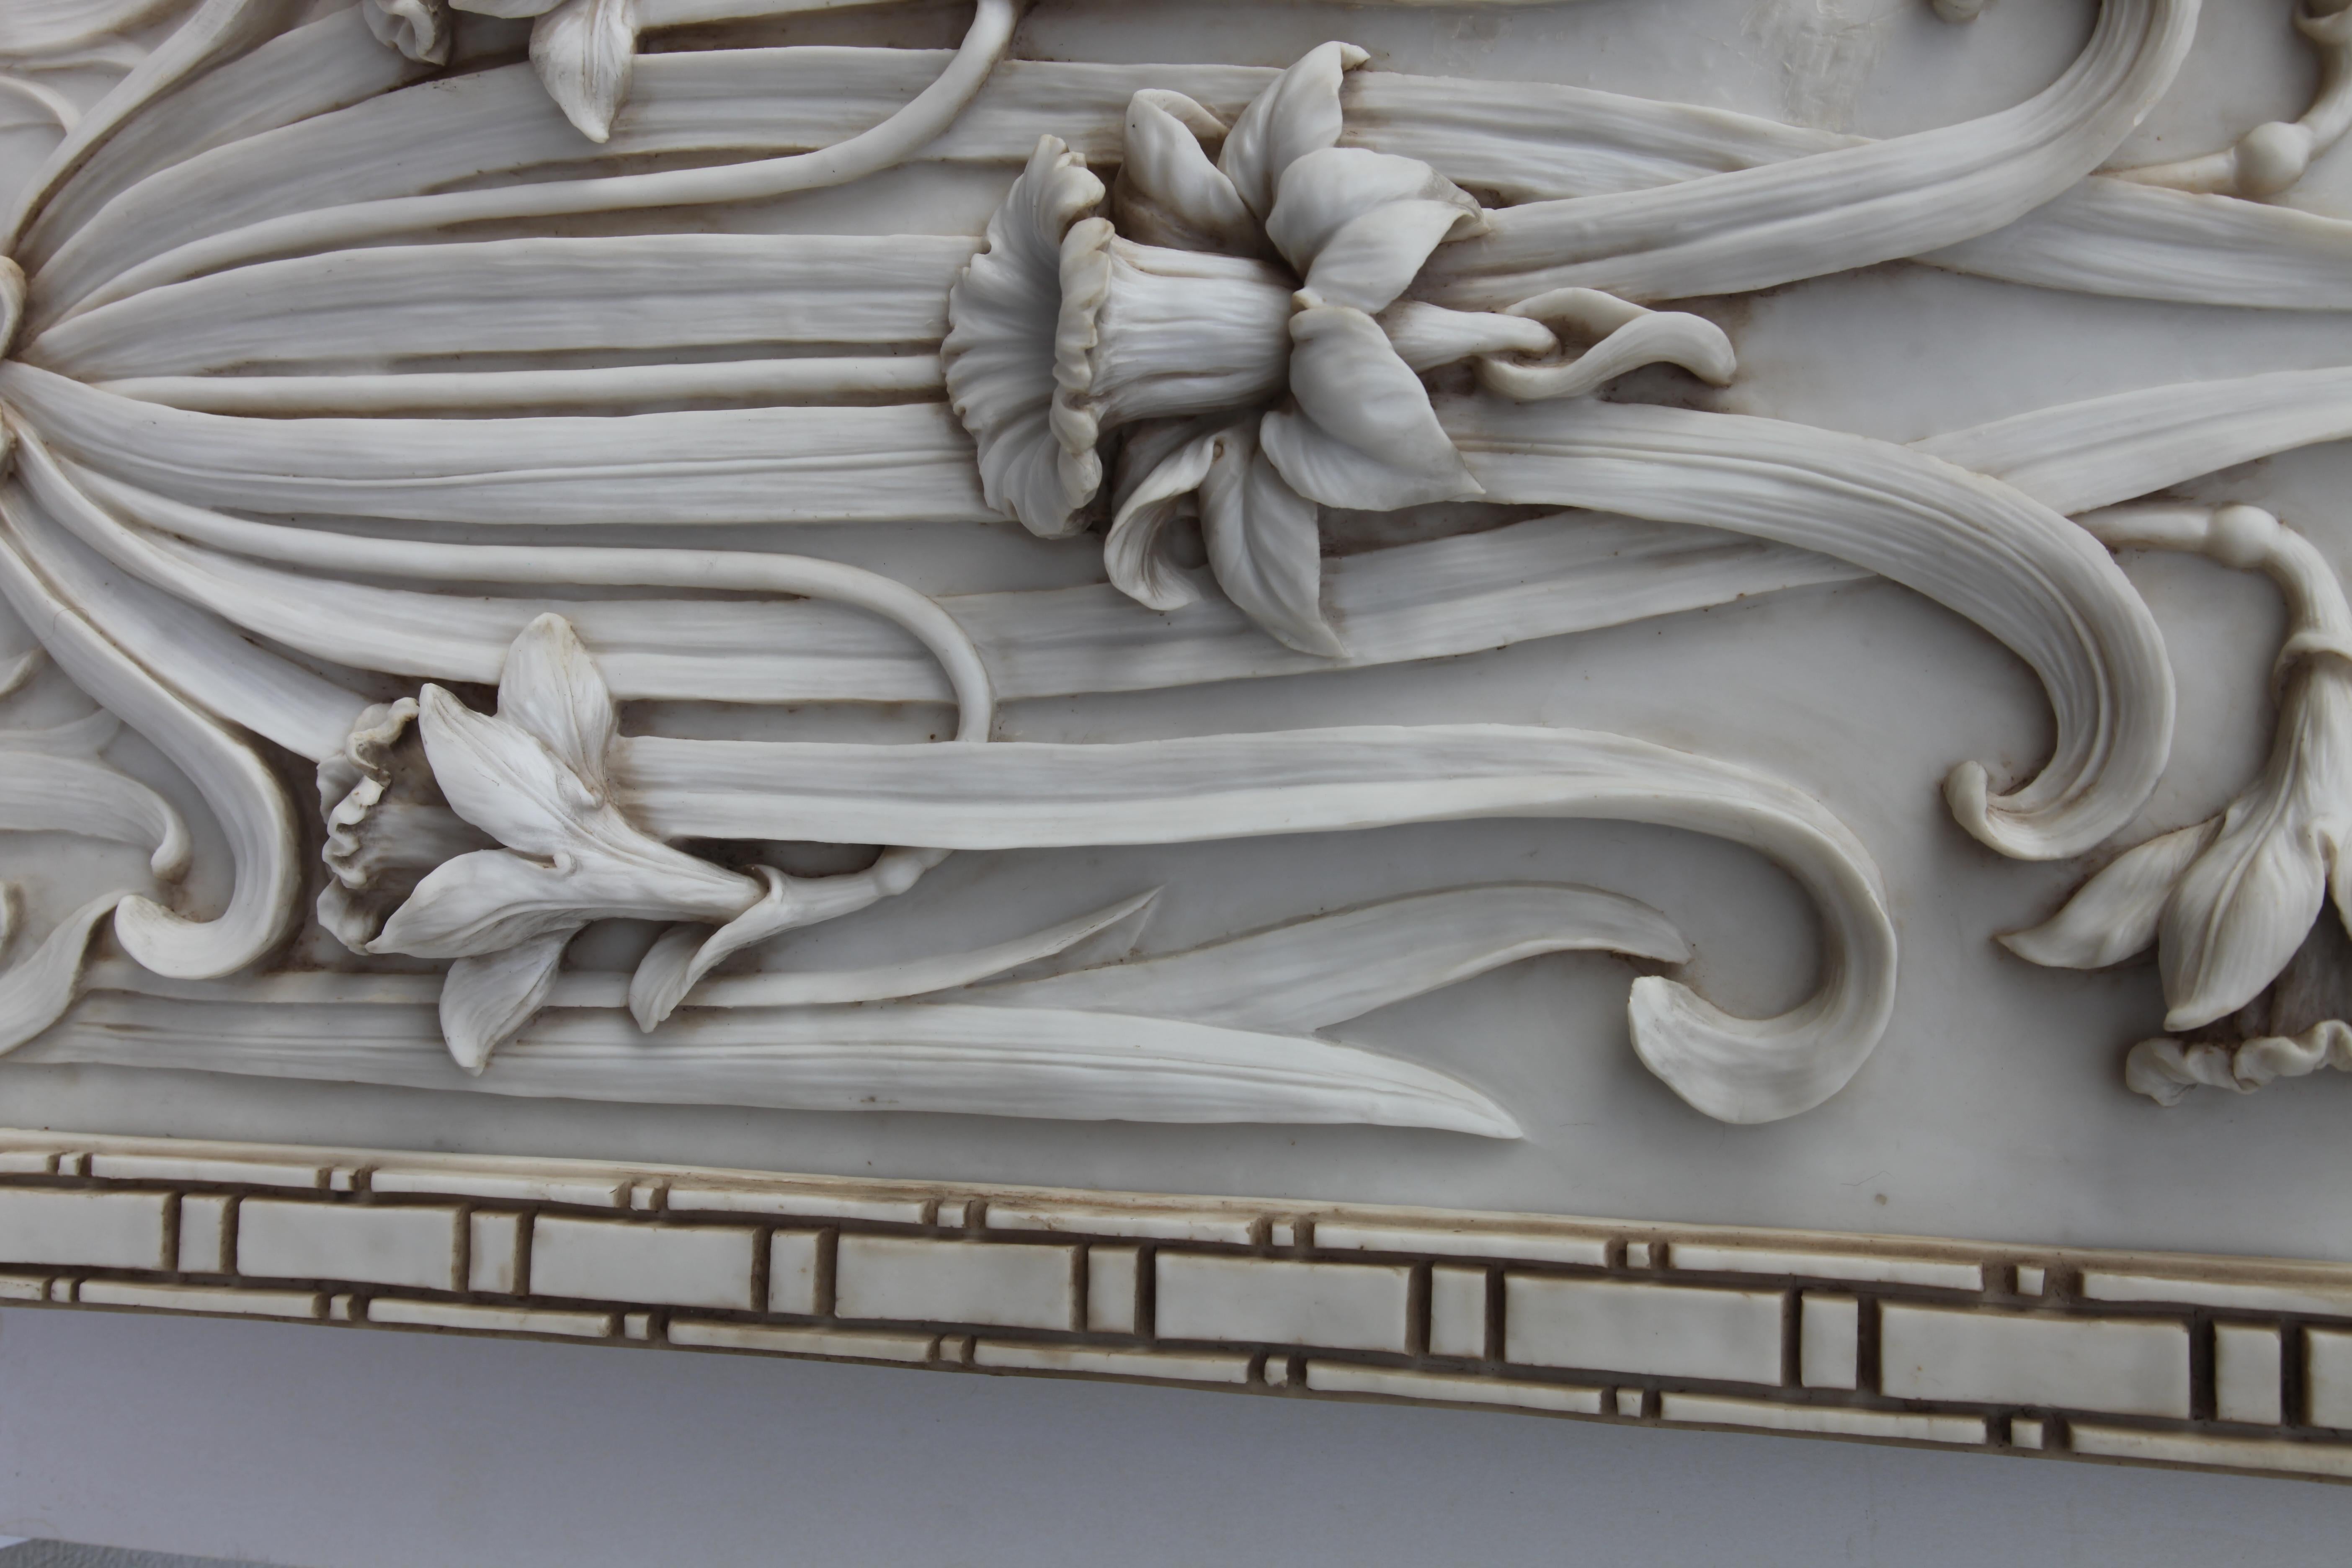 Early 20th Century Art Nouveau 3-D Alabaster Sculptural Panel with Foliage and Daffodils / Jonquils For Sale